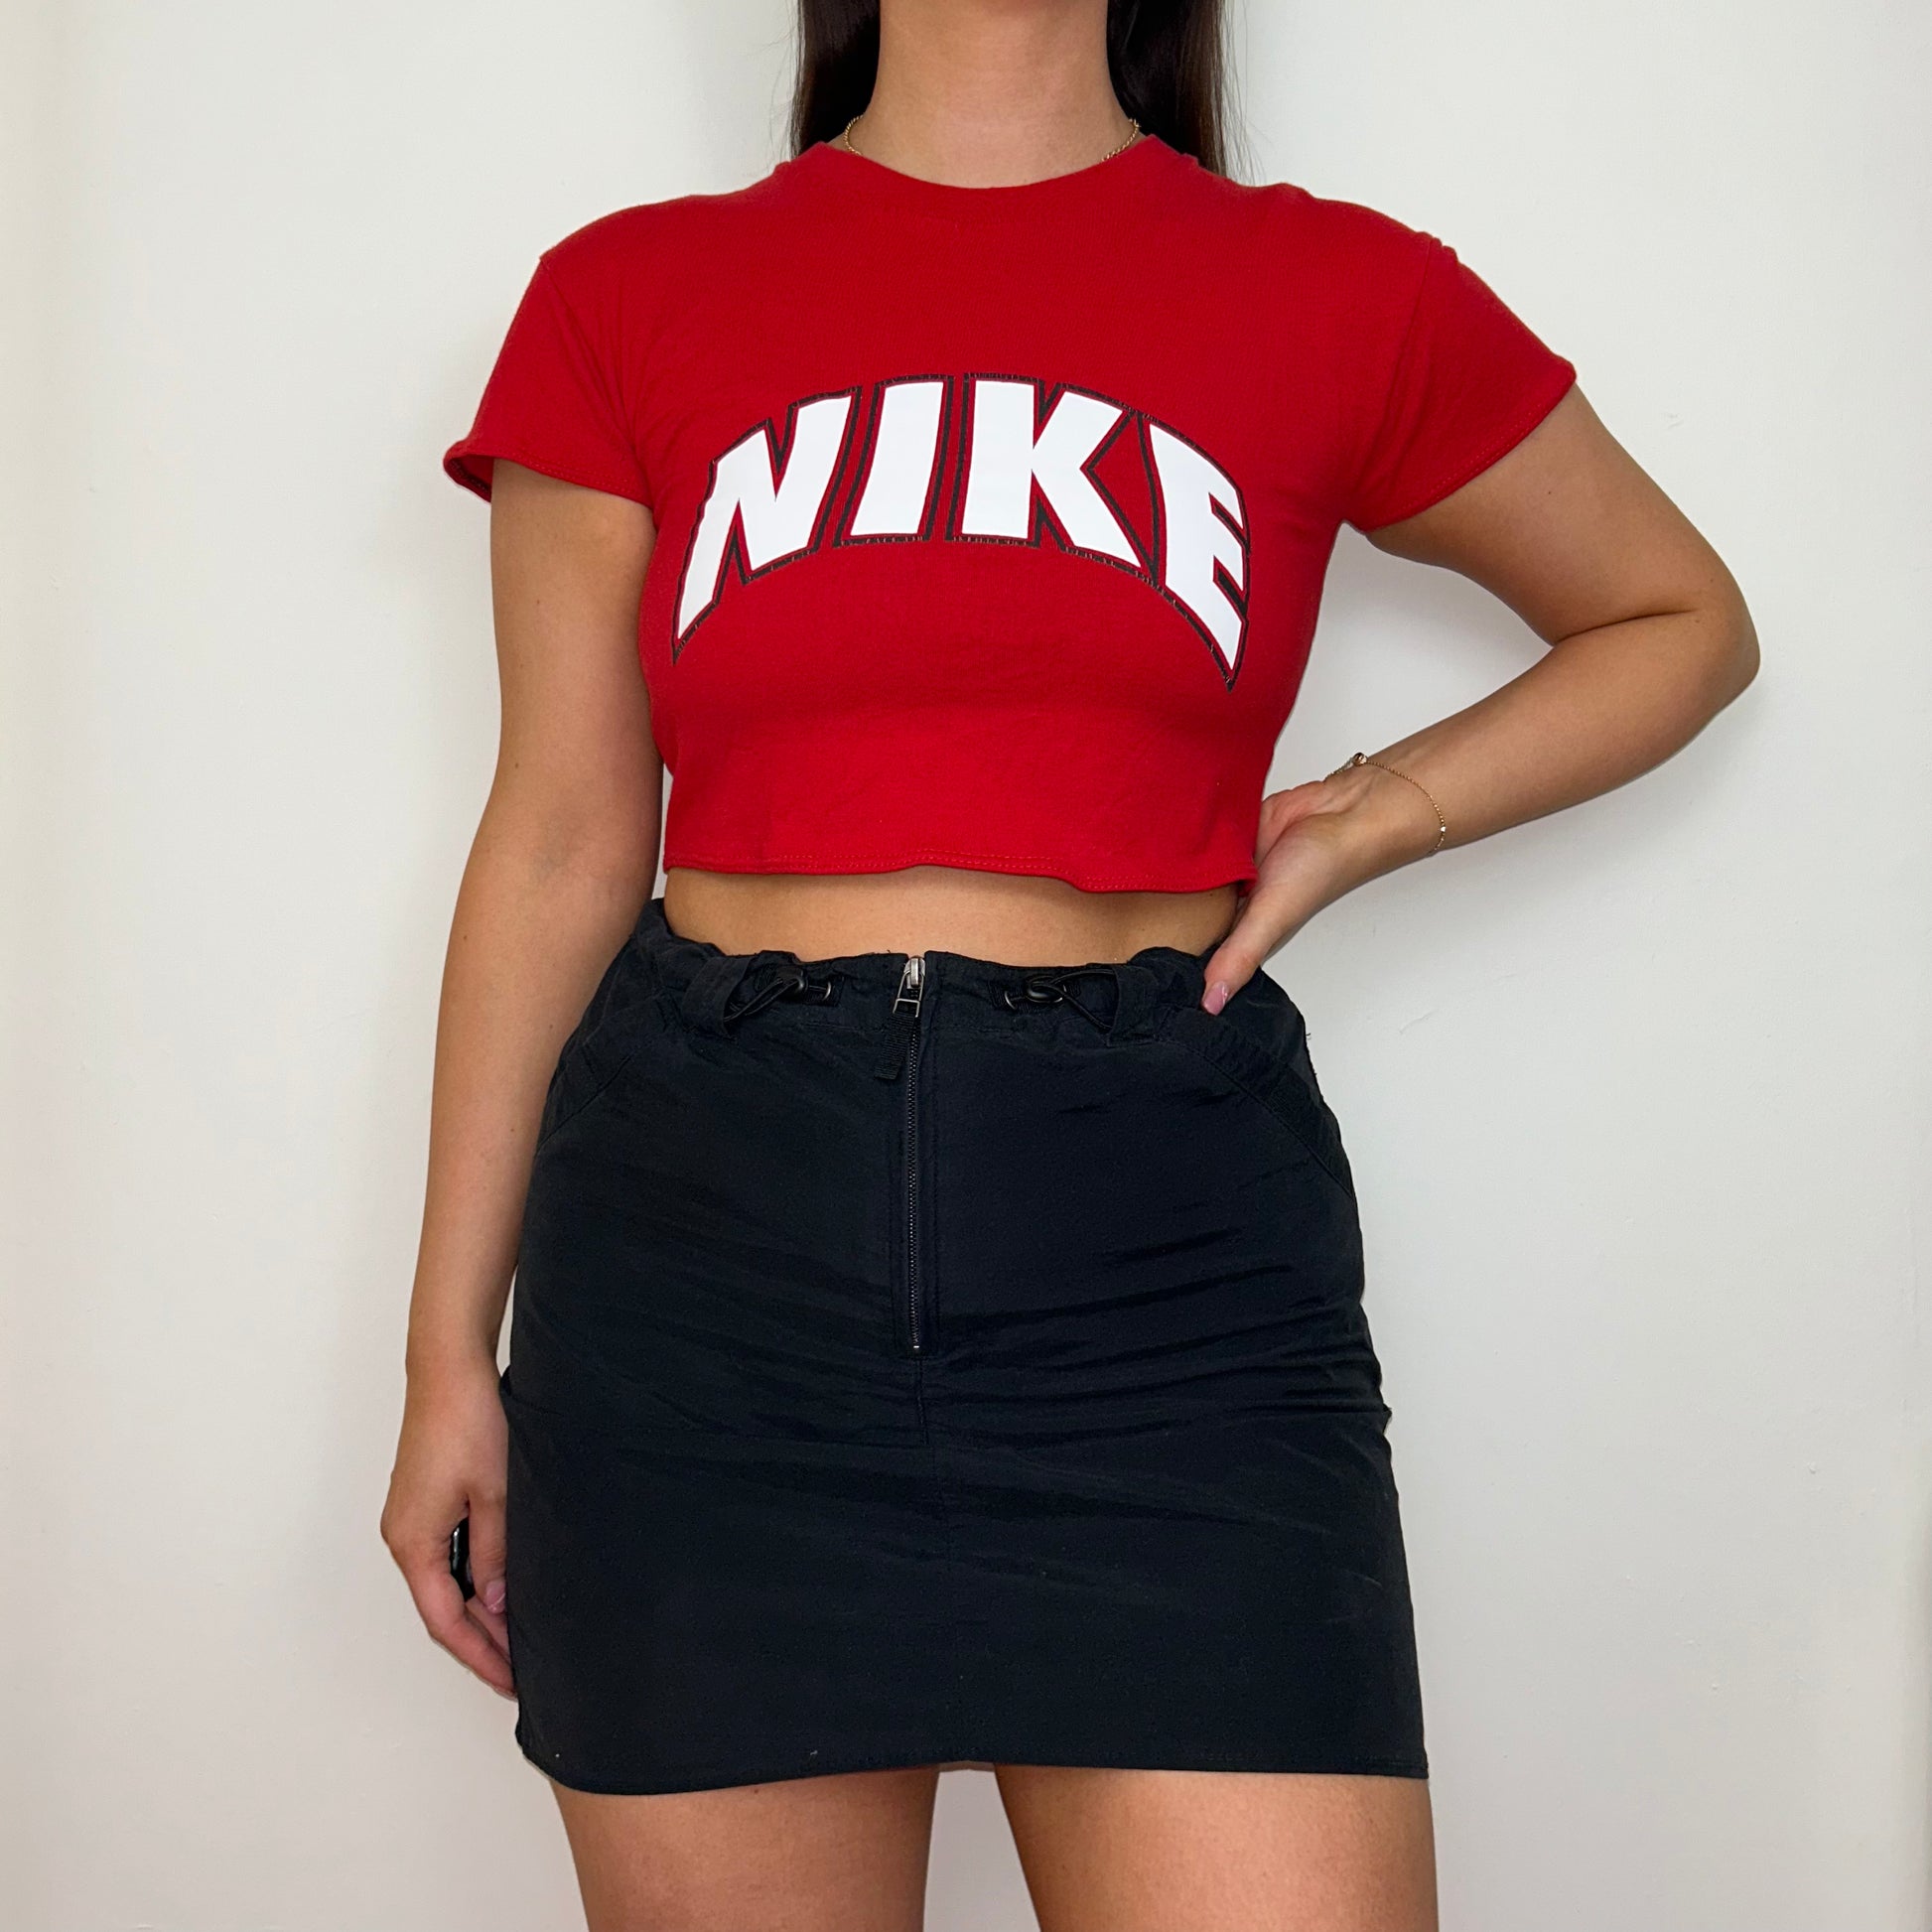 red short sleeve crop top with white nike logo shown on a model wearing a black skirt